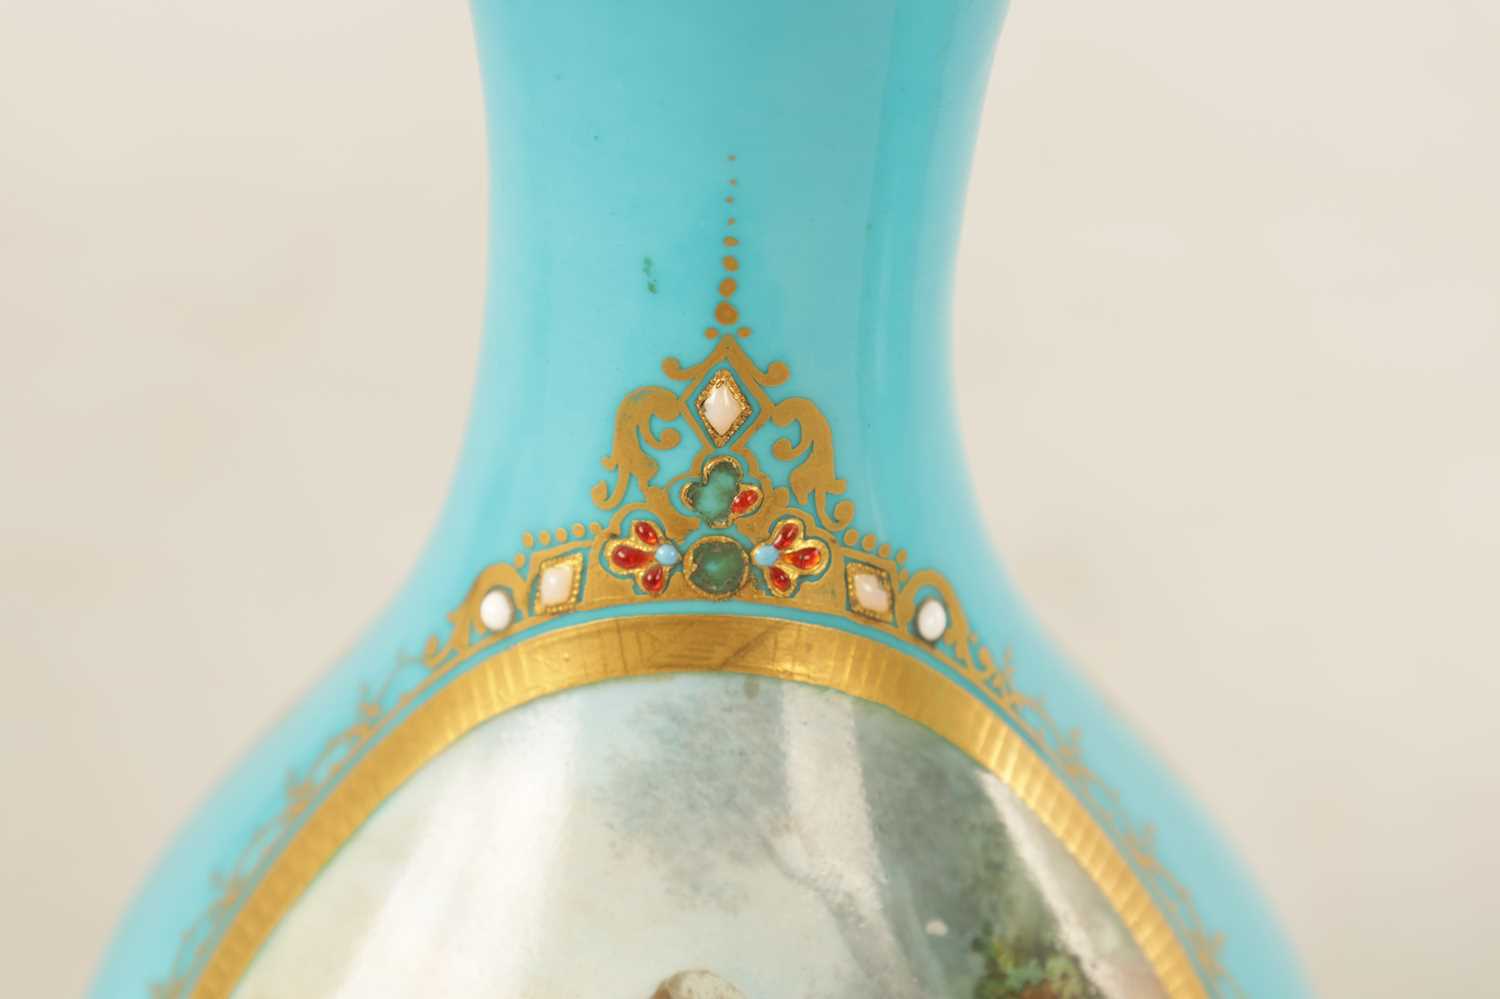 A PAIR OF 19TH CENTURY FRENCH SERVES PORCELAIN VASES - Image 9 of 11